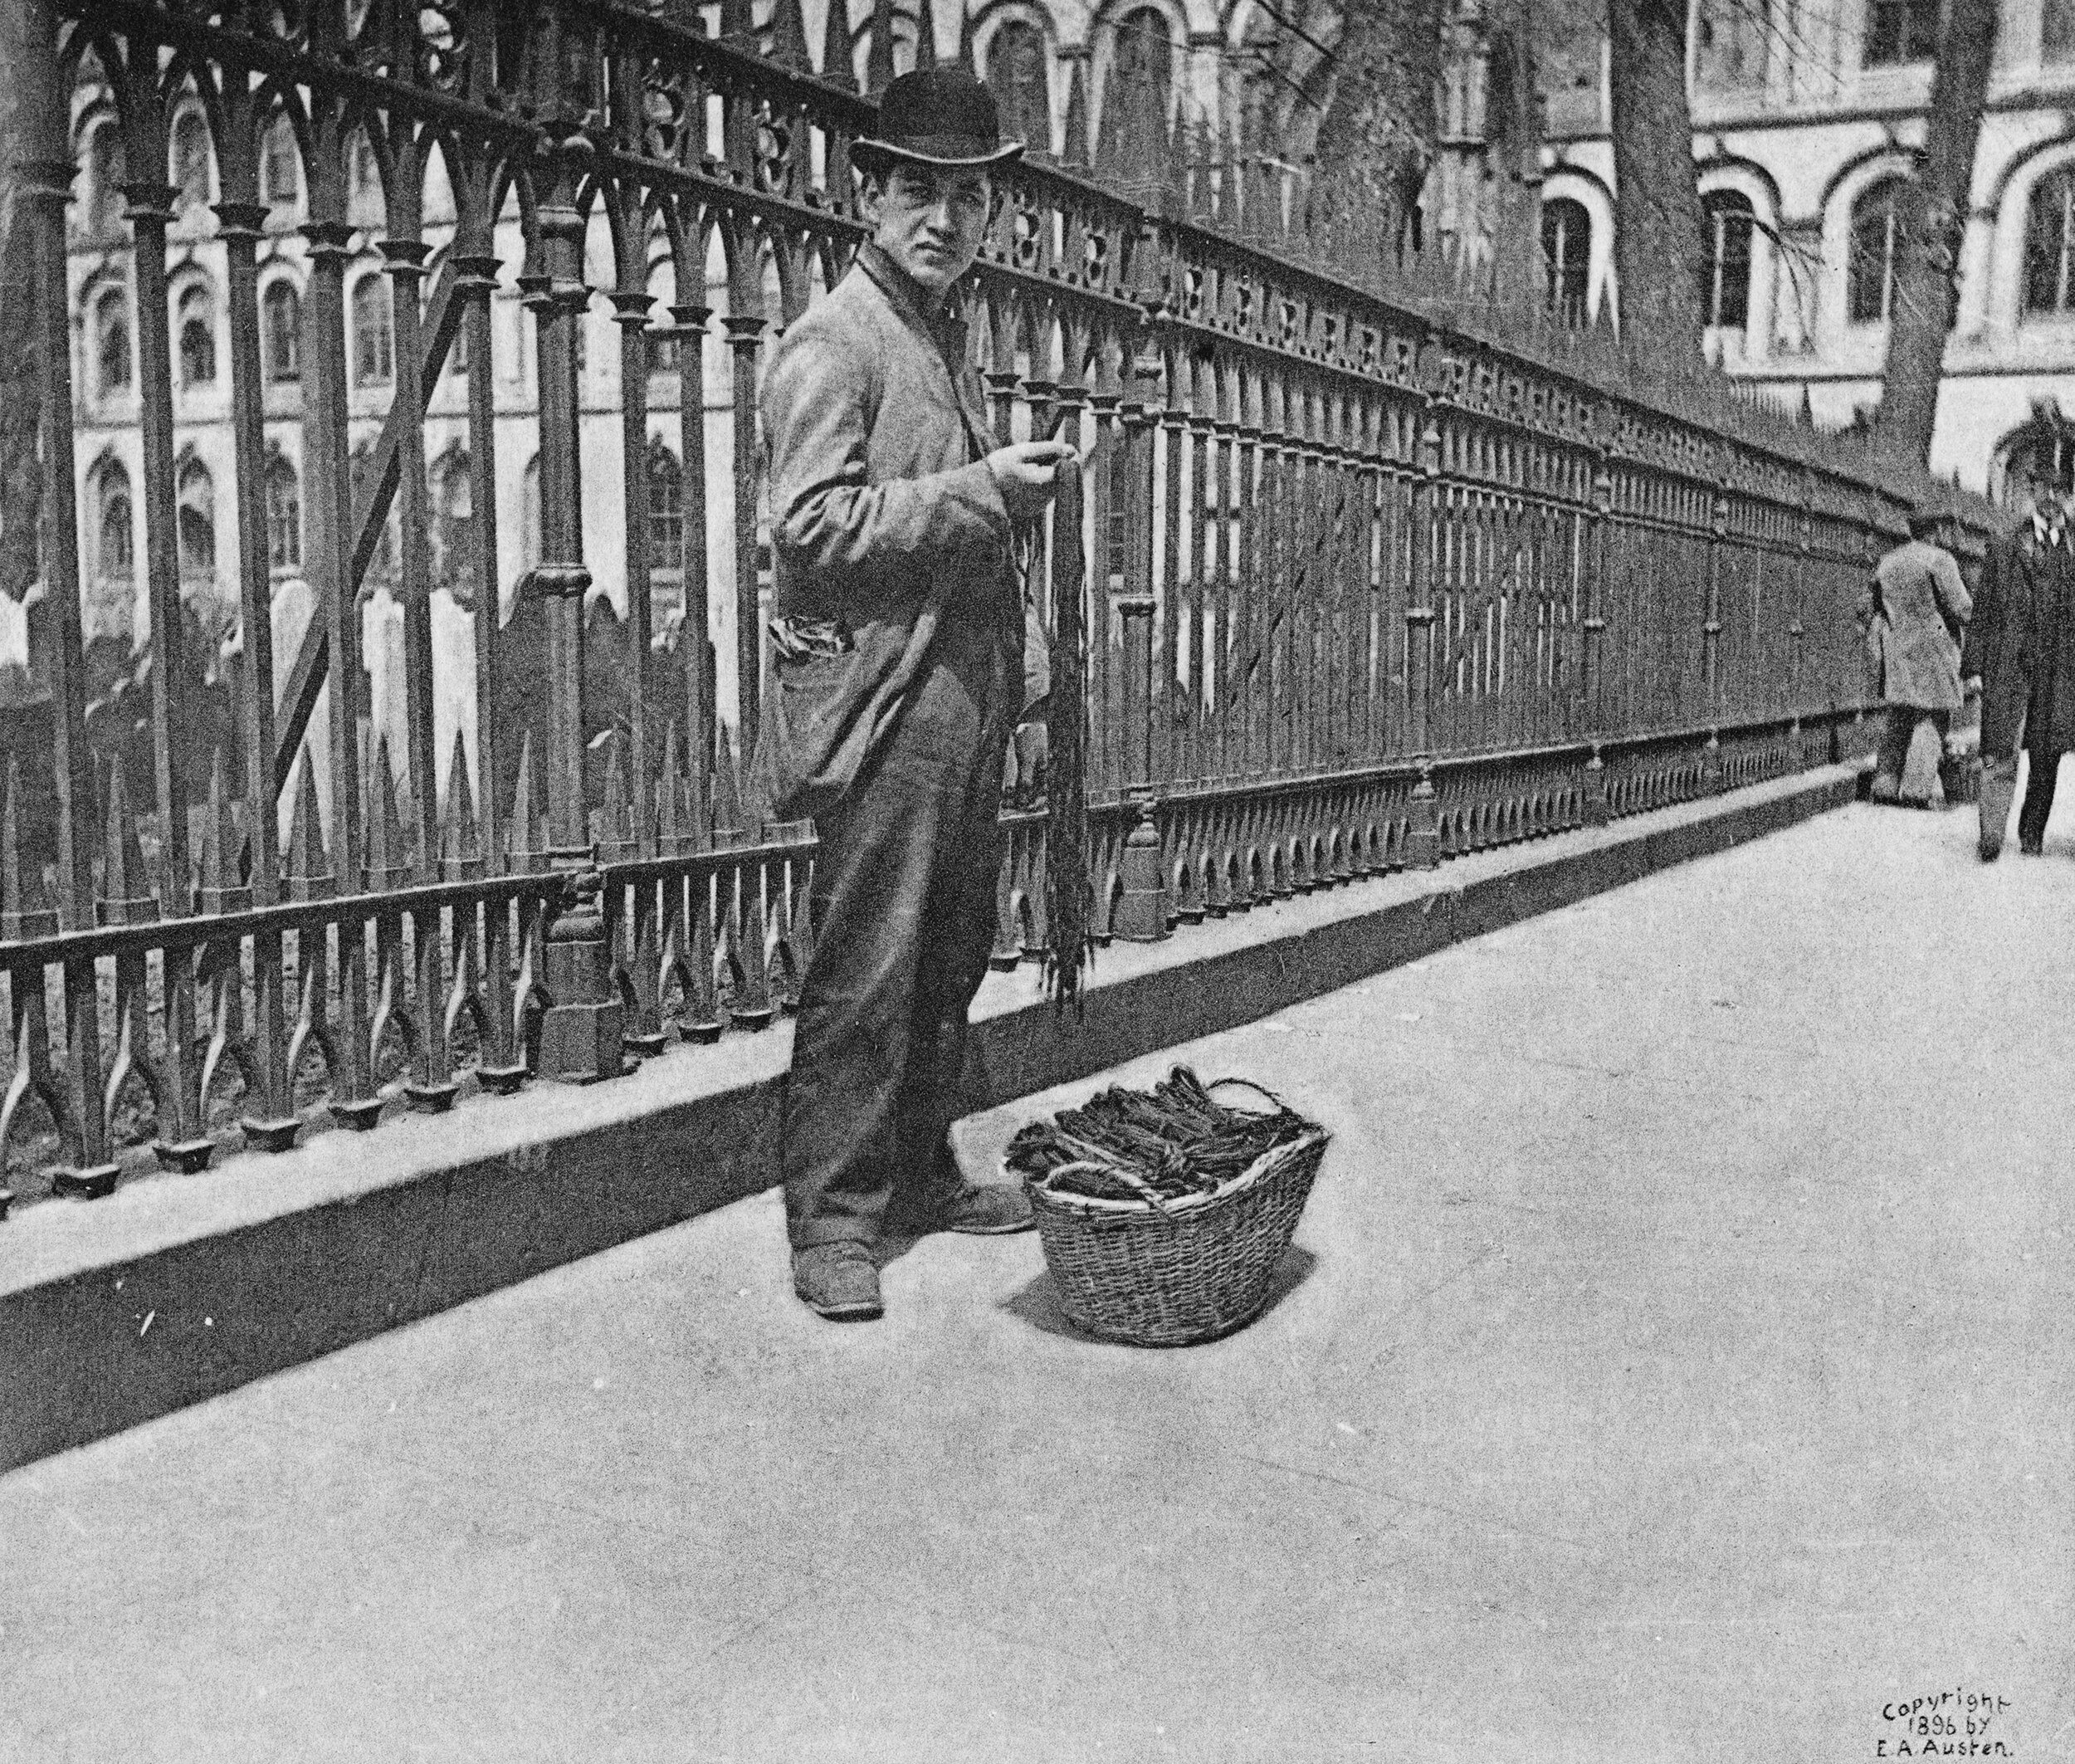   Shoelace Pedler, Trinity Church Railing   Collection of Historic Richmond Town, 50.015.2190 